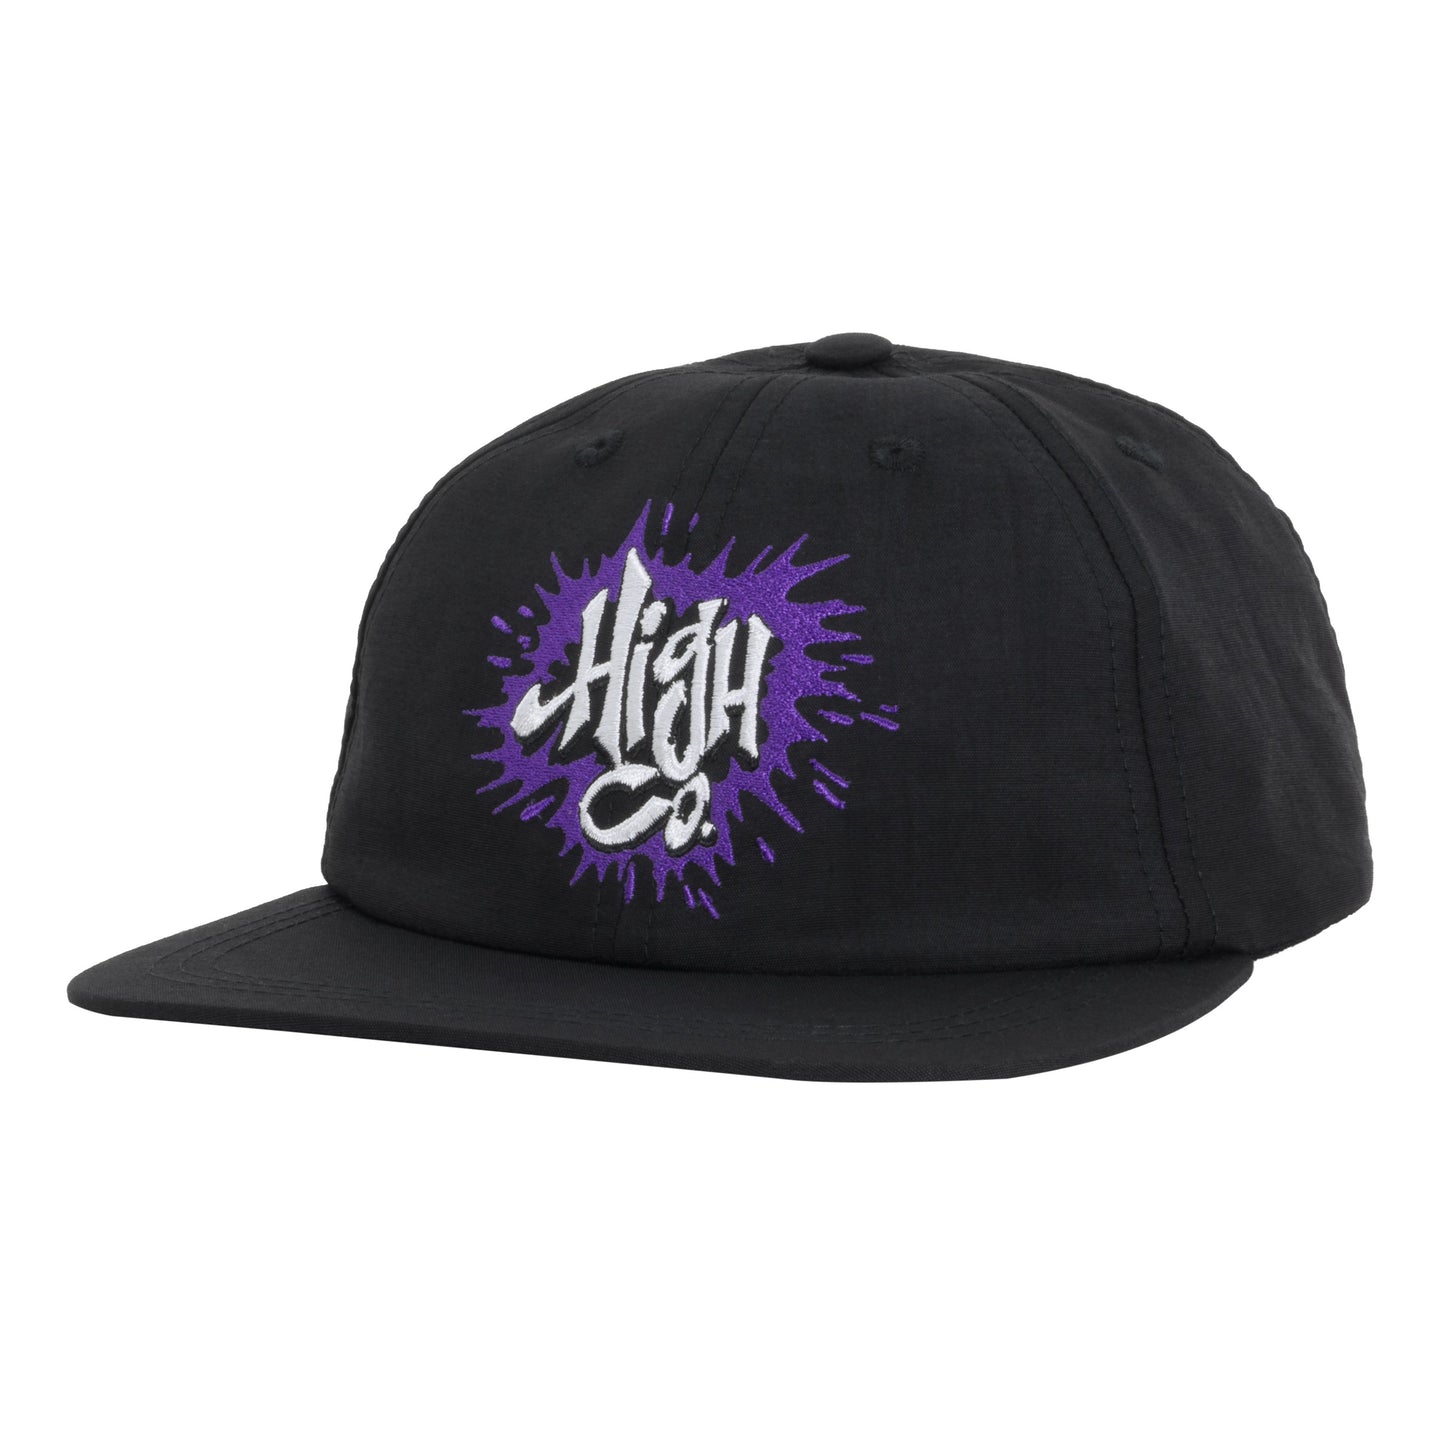 HIGH - 6 Panel Wildstyle "Black" - THE GAME